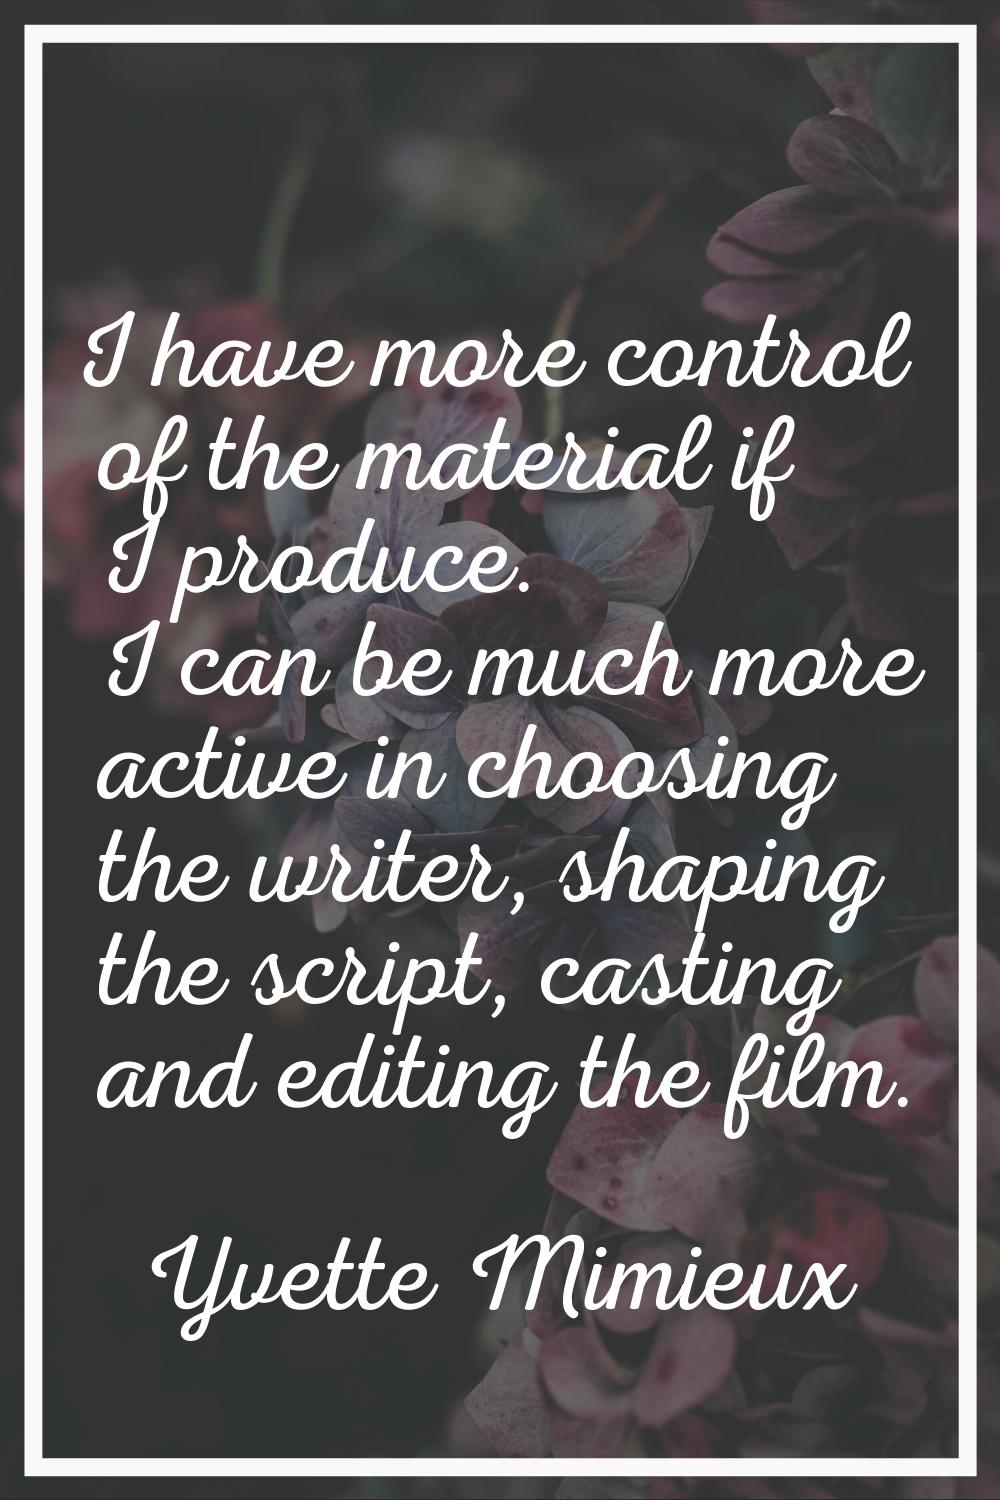 I have more control of the material if I produce. I can be much more active in choosing the writer,